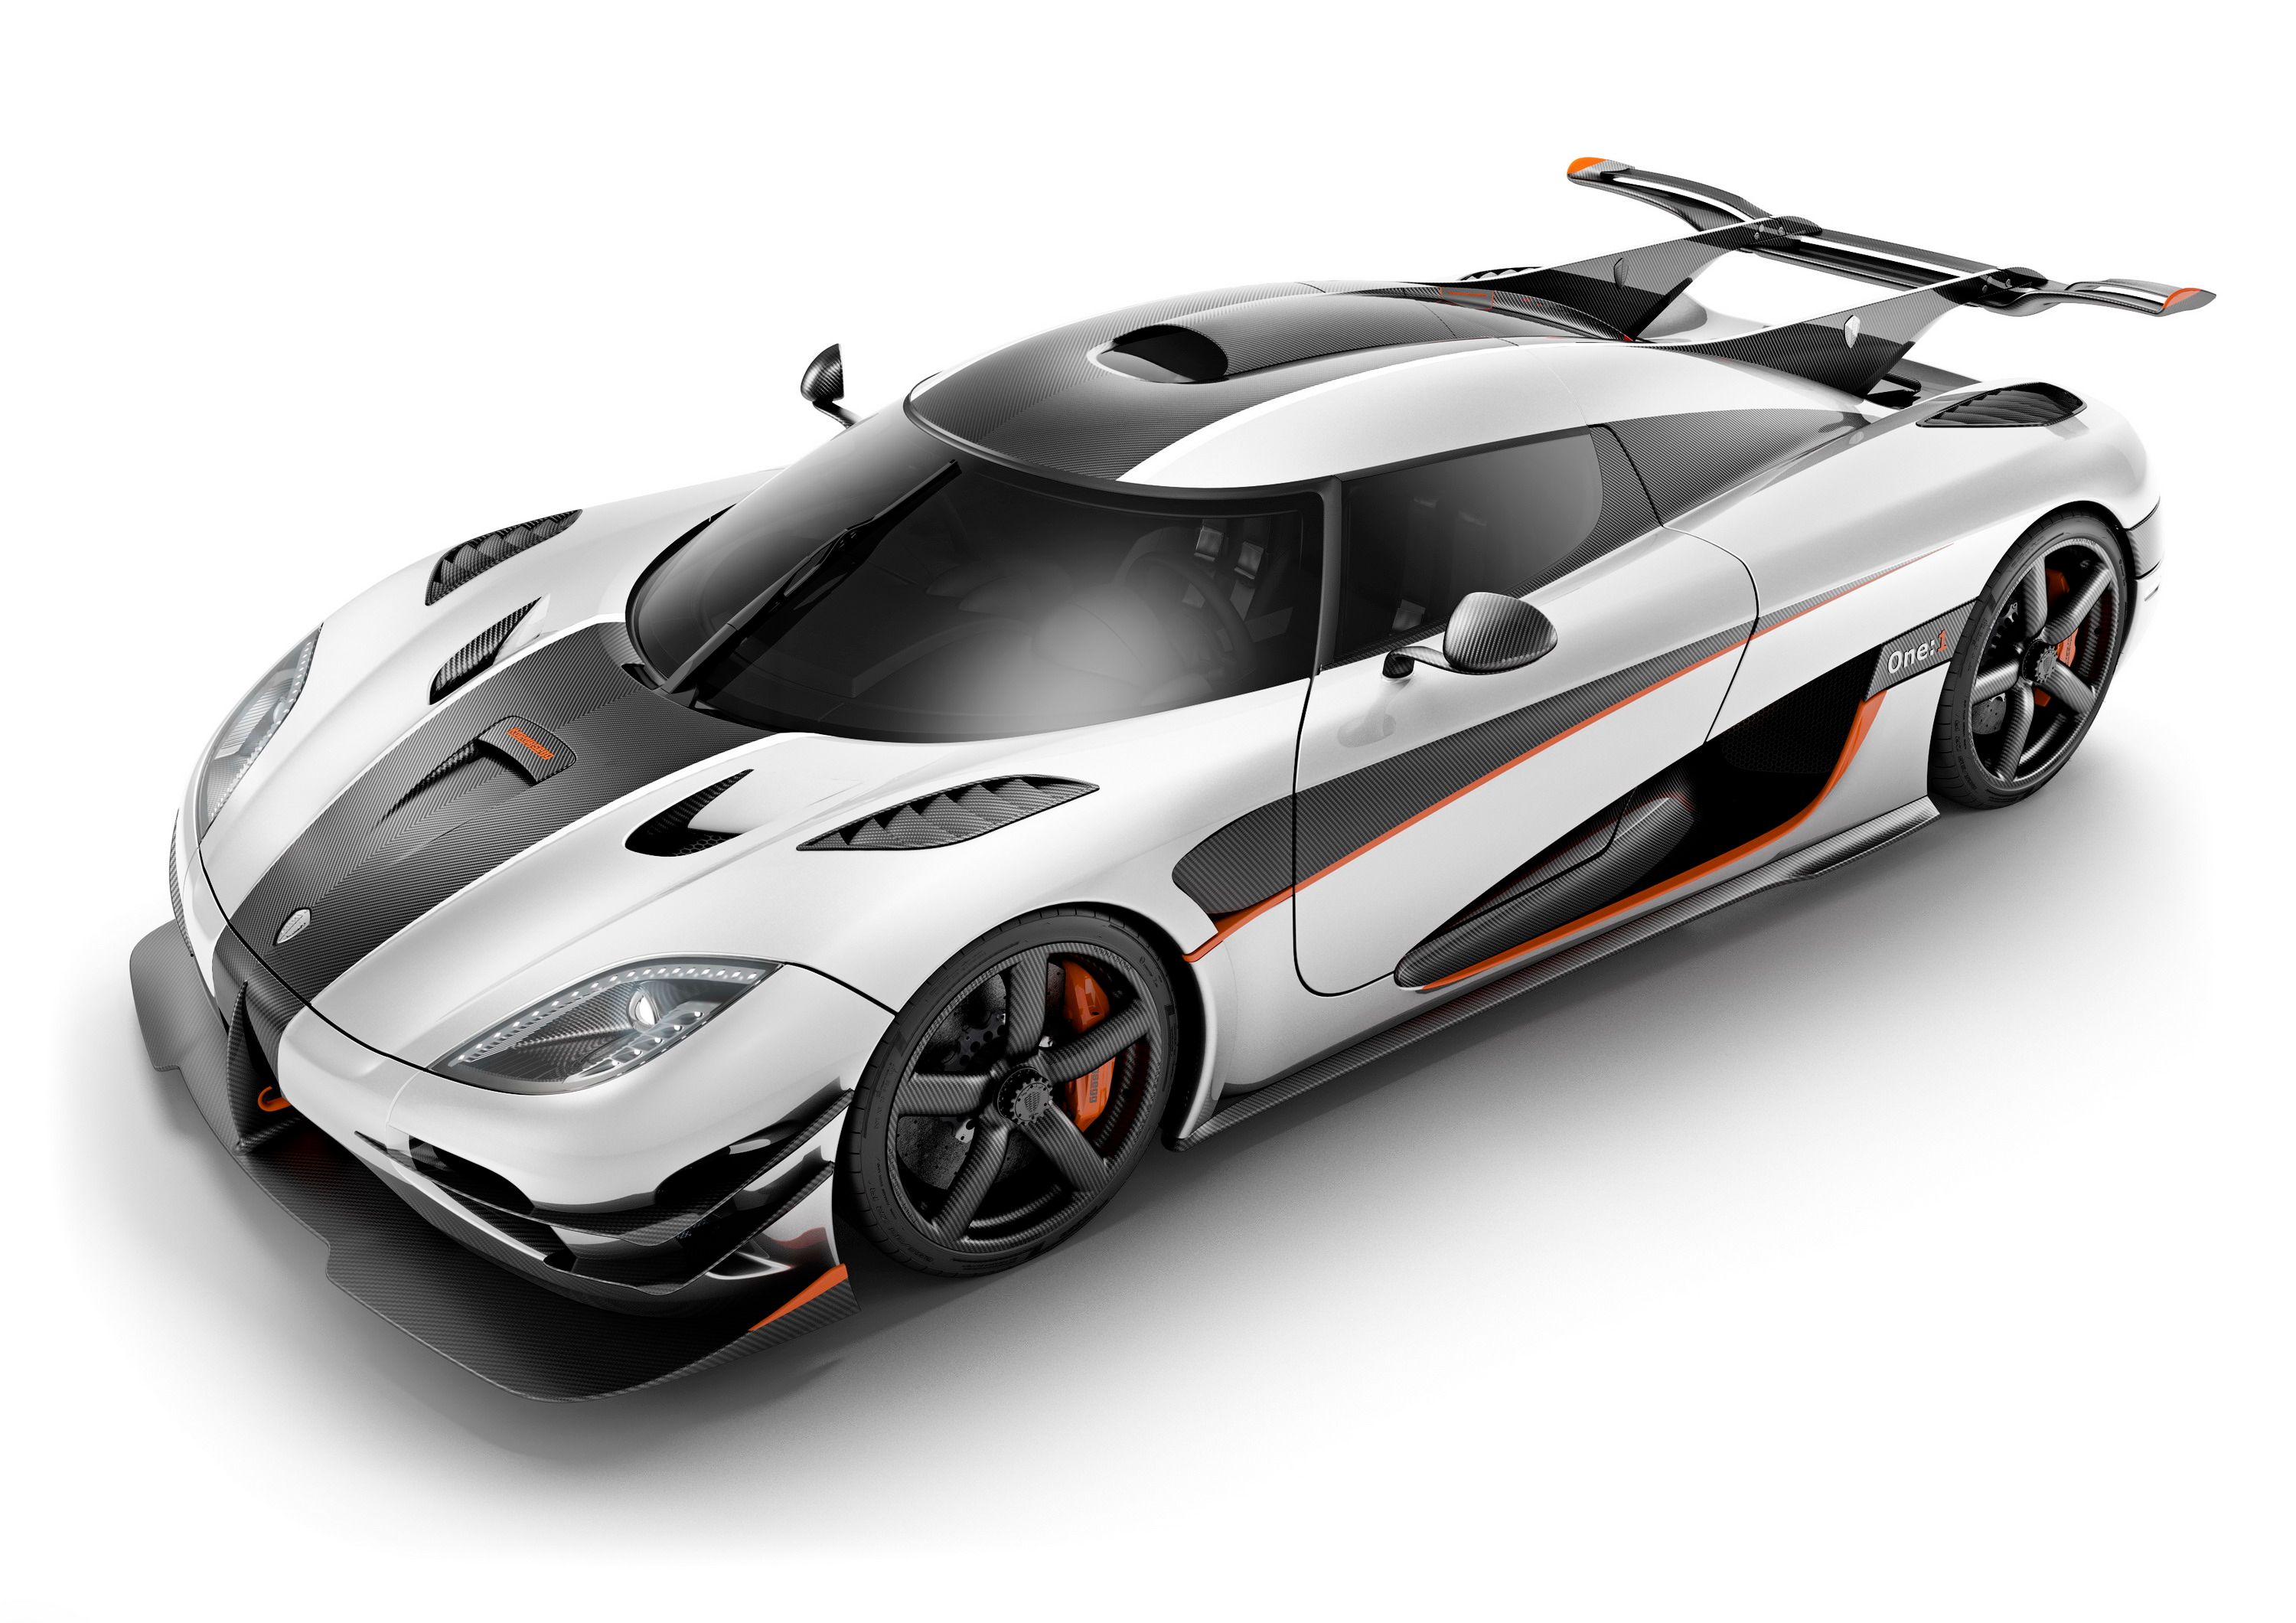  Koenigsegg is planning on breaking a few records with the Agera R and One:1. 